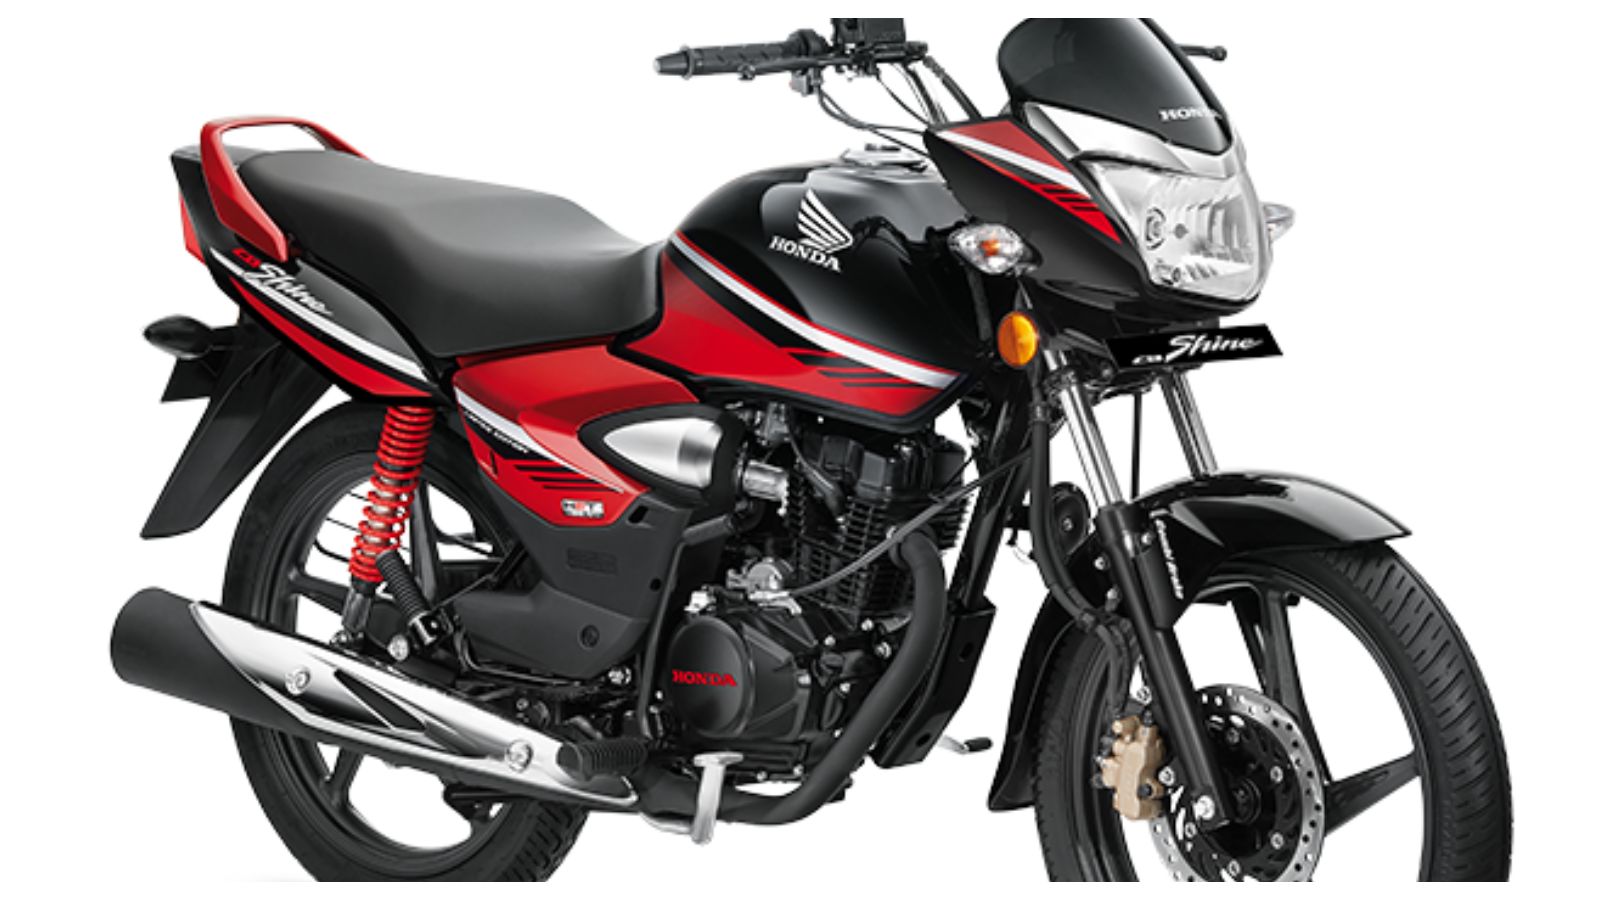 Limited Edition Cb Shine Has Been Launched At Inr 60 758 Ex